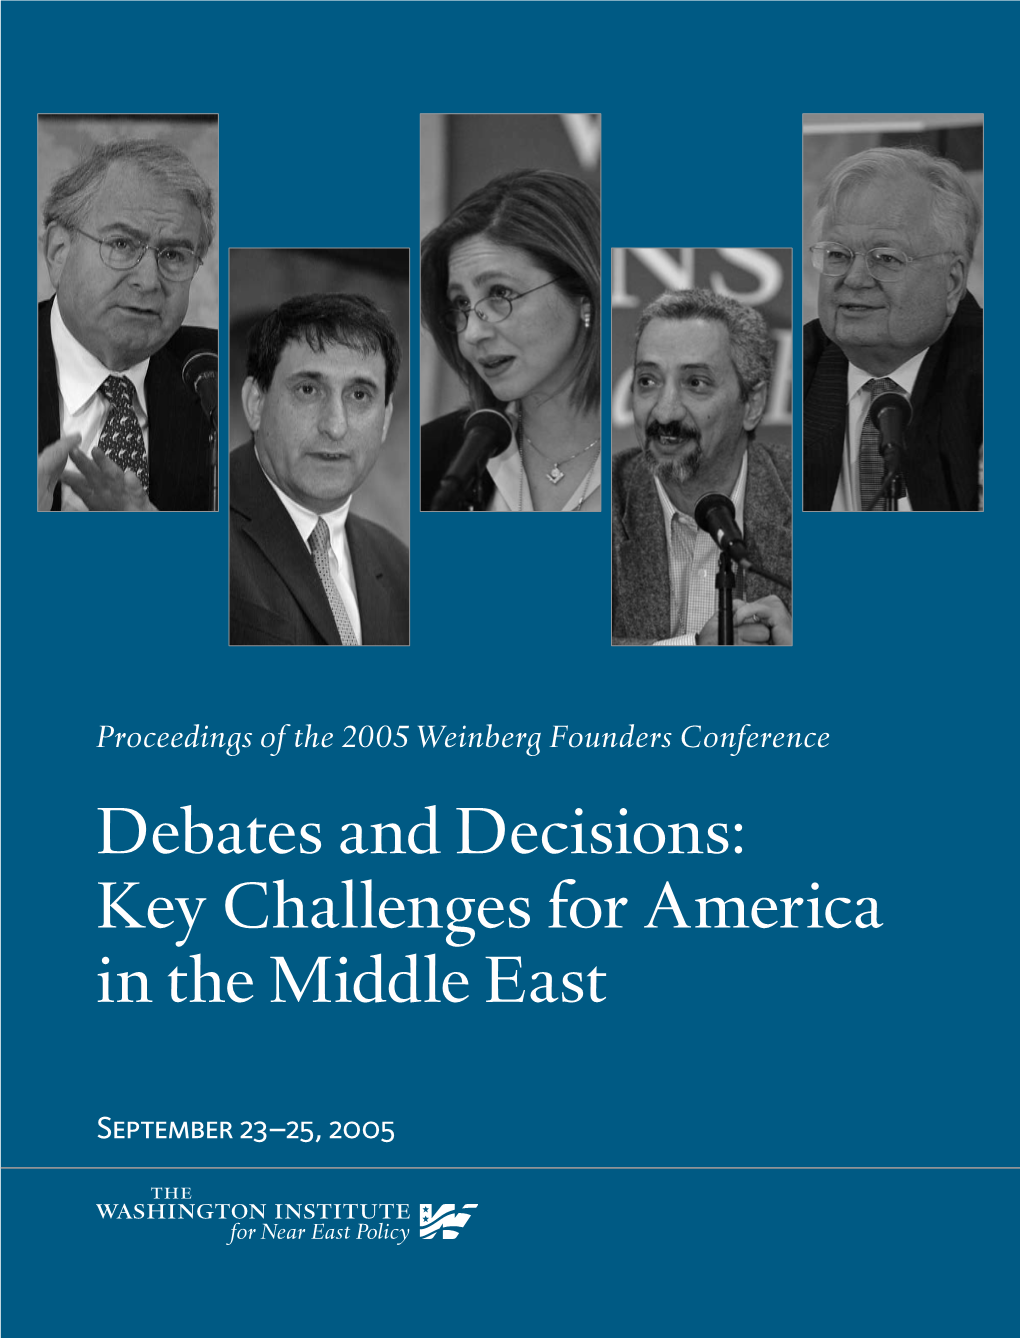 Debates and Decisions: Key Challenges for America in the Middle East